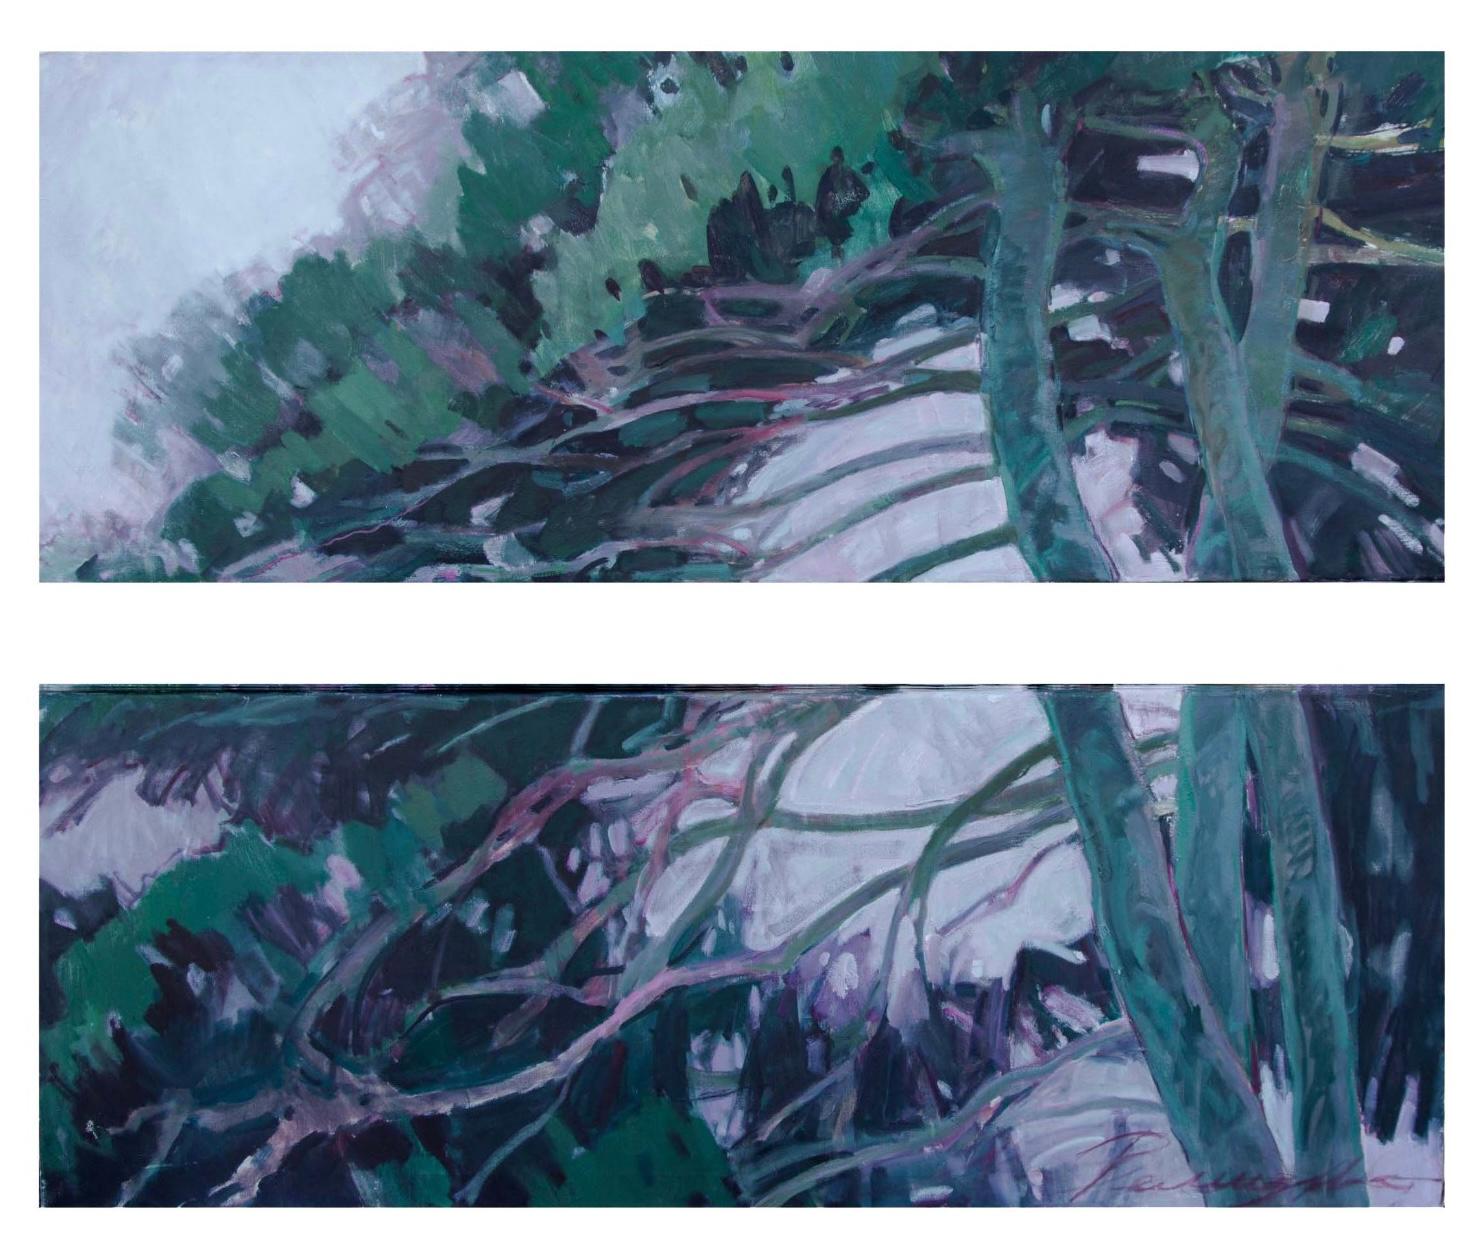 "Pines" diptych. Project "Wind", Canvas, oil, 120x160 cm - Painting by Svetlana Remizova